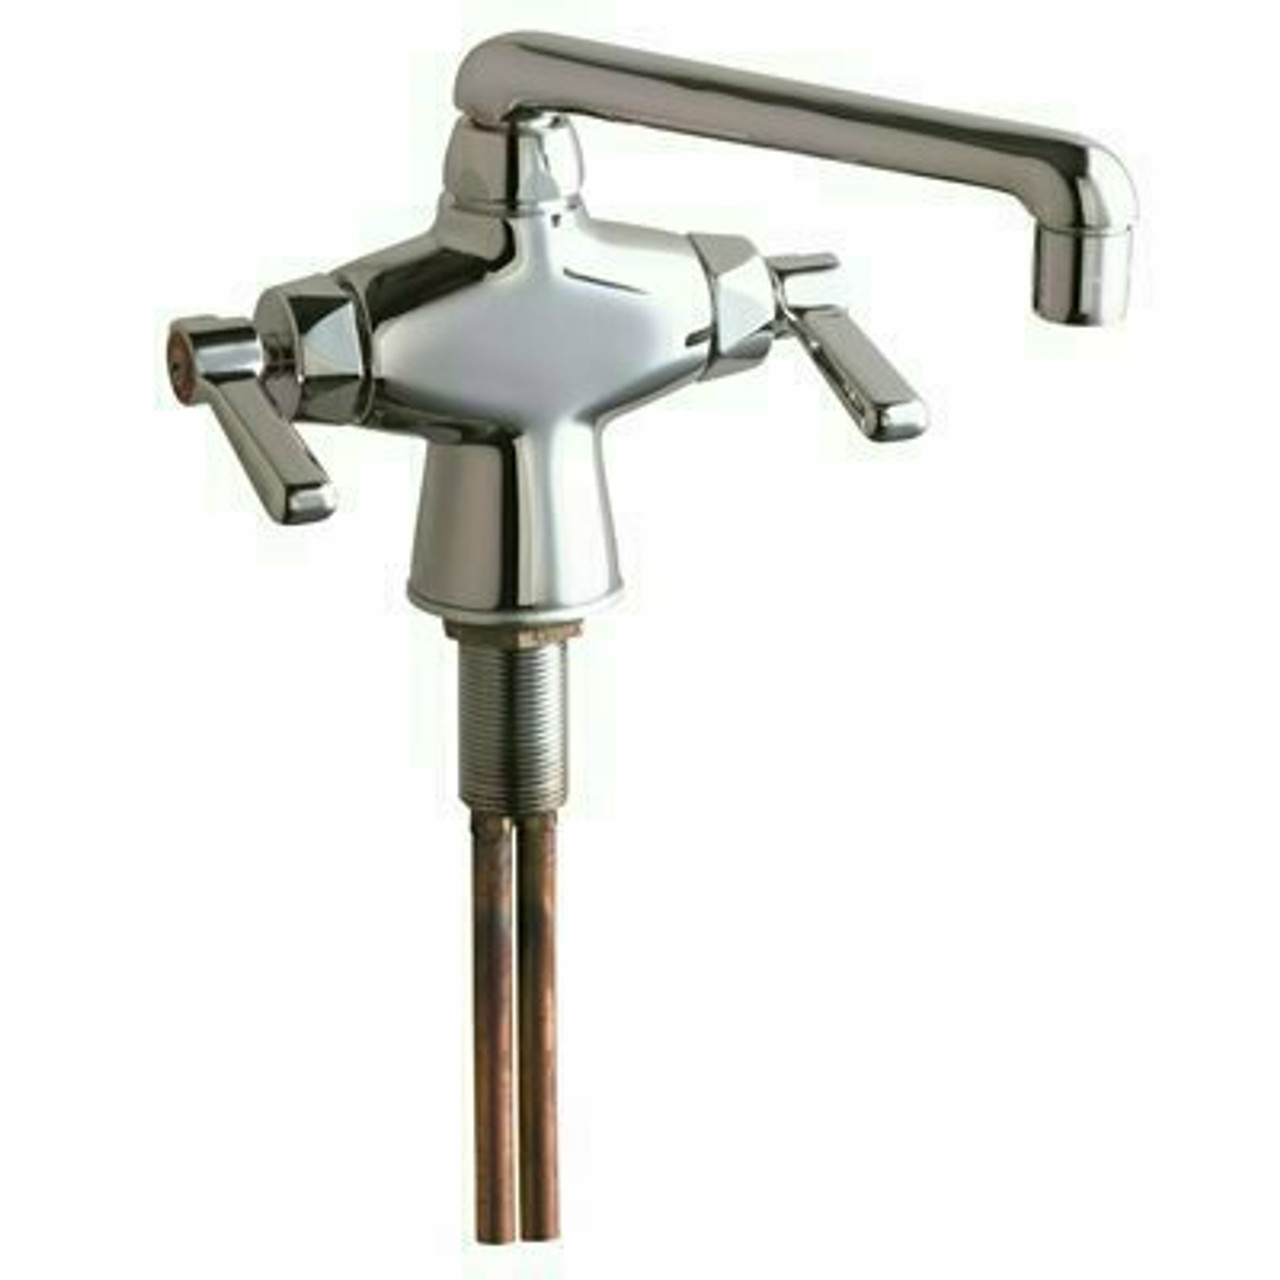 Chicago Faucets Two Handled Deck Mount Pot Filler Utility Faucet With Ceramic Cartridge, Lead Free In Chrome Plated Finish